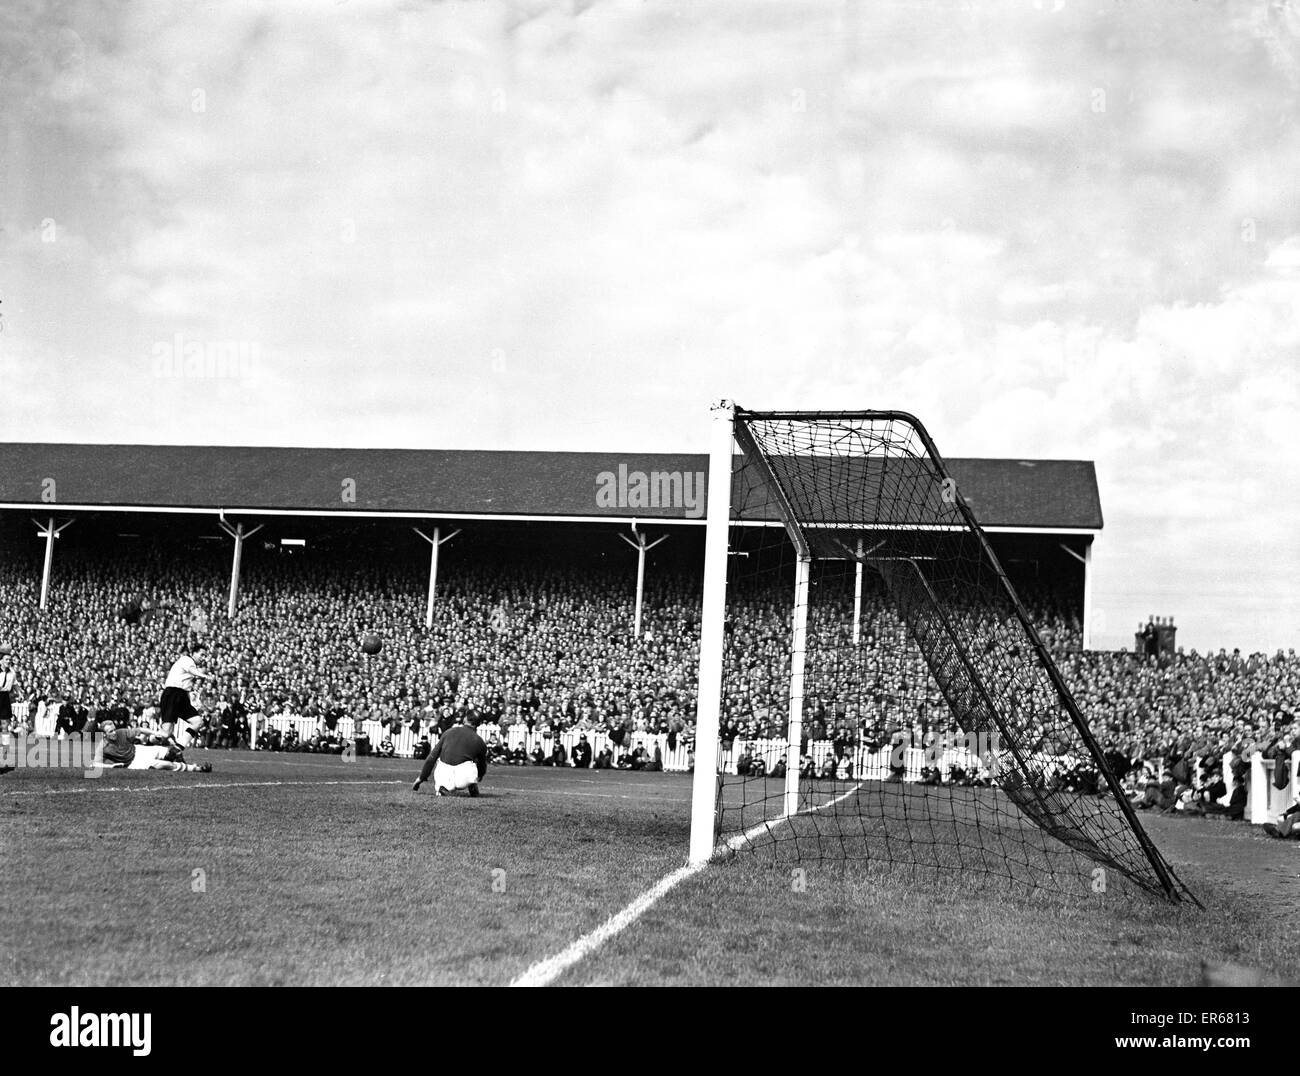 English League Division One match at Meadow Lane. Notts County 2 v Nottingham Forest 2. Tommy Lawton in action for Notts County. 15th September 1951. Stock Photo